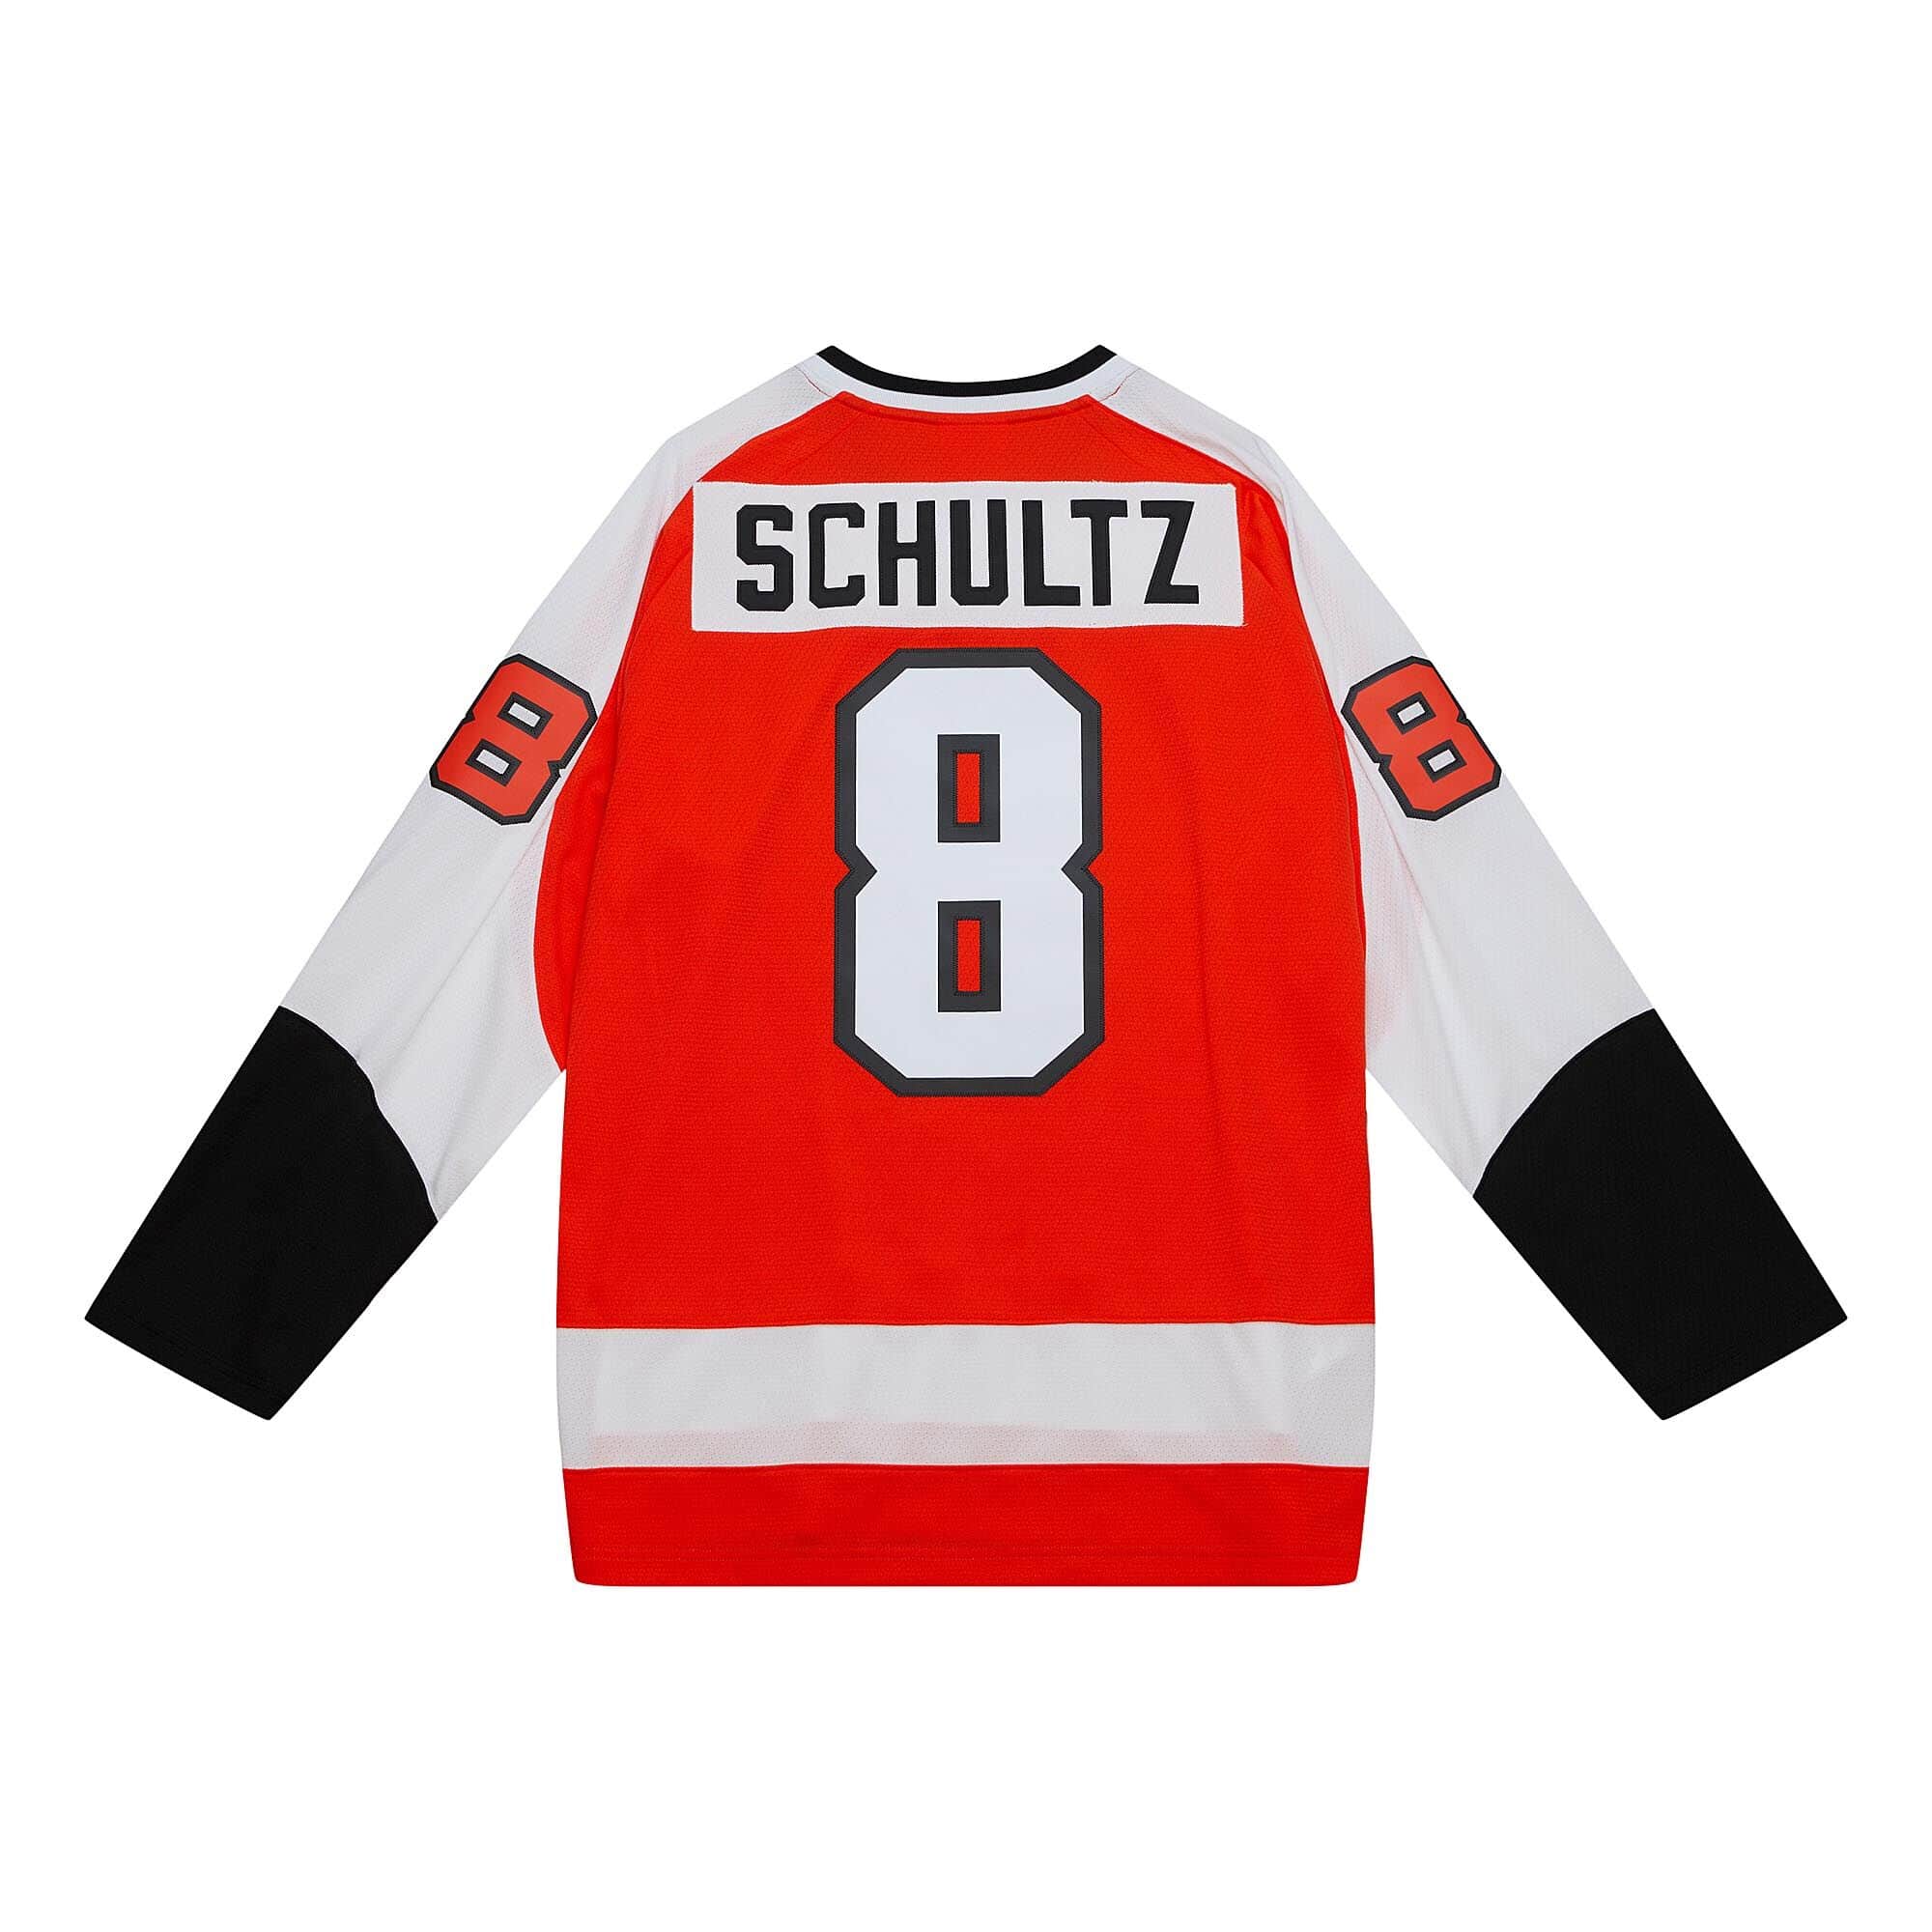 Dave Schultz Flyers Jersey '74 for Sale in Levittown, PA - OfferUp